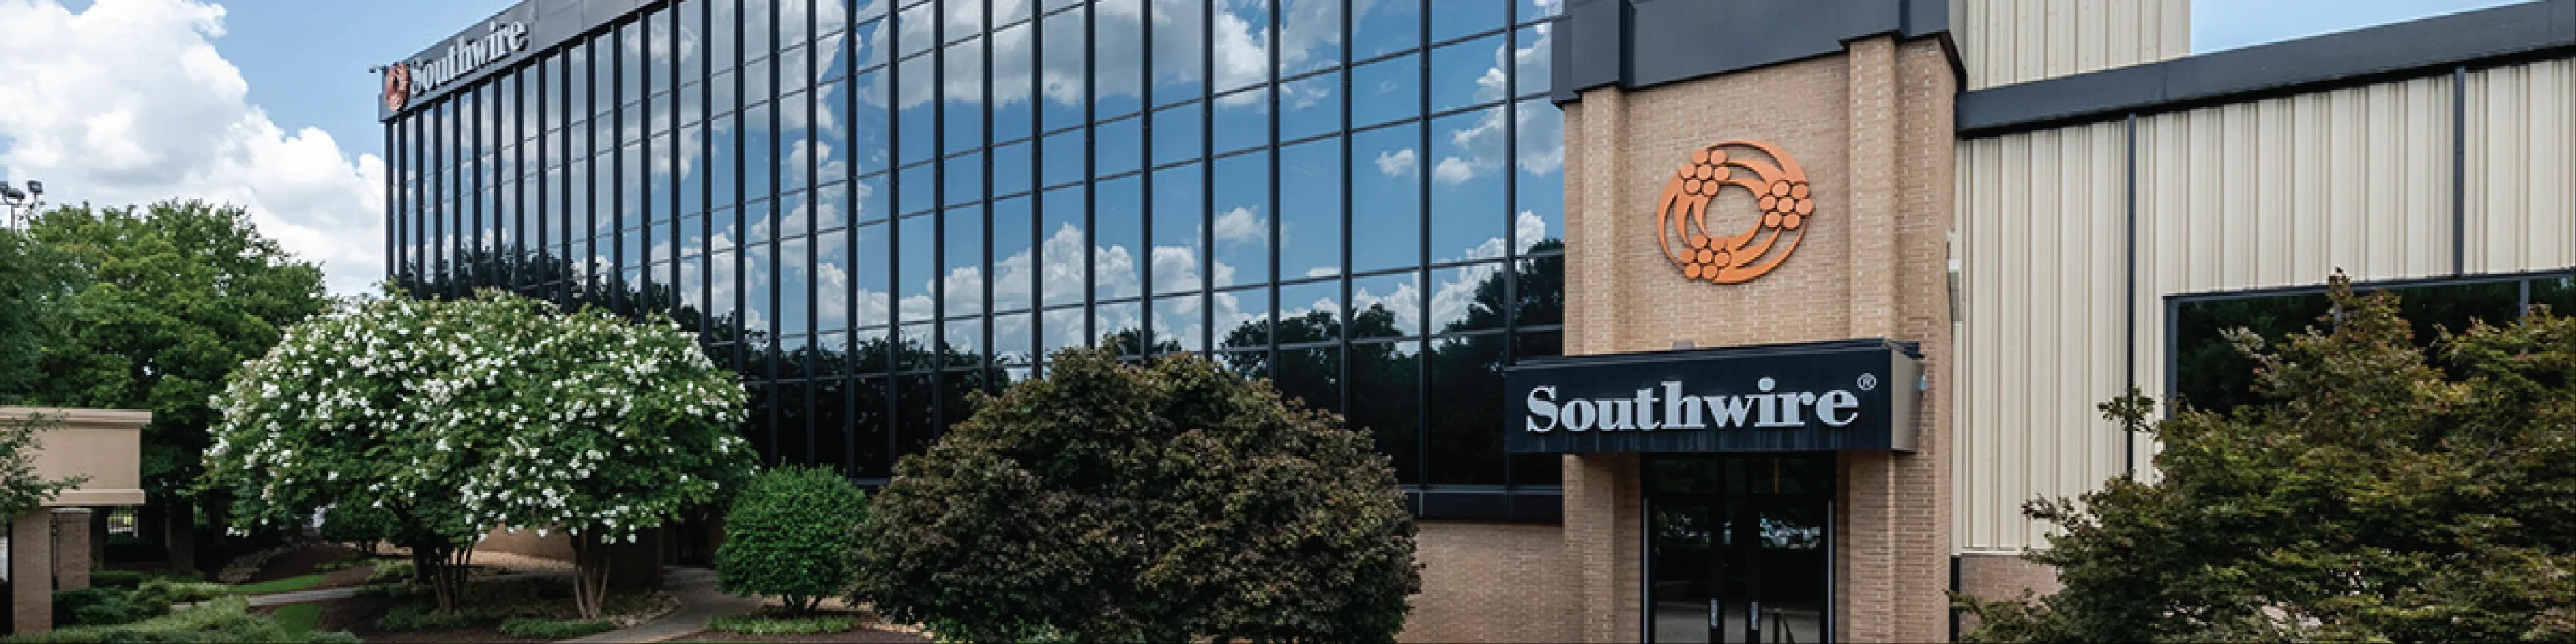 Featured Suppliers Banner Image - Southwire 